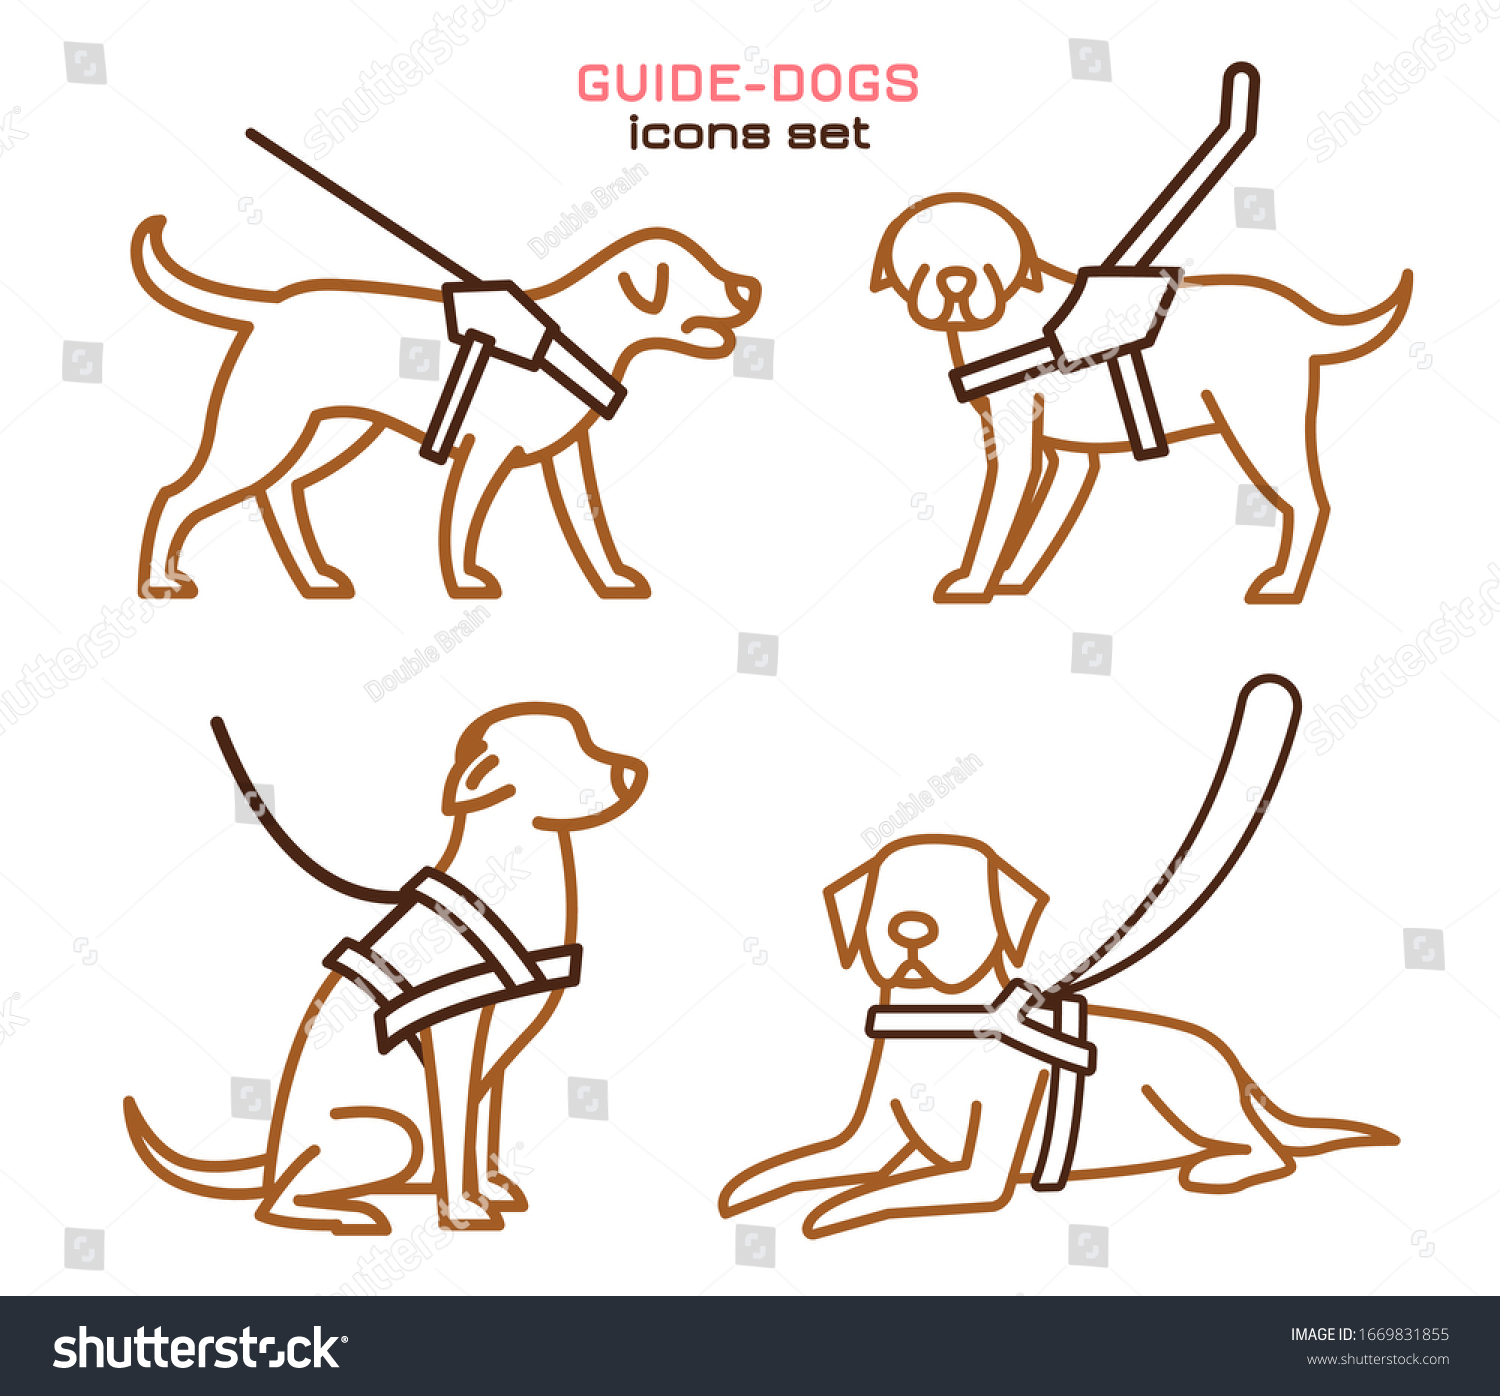 SVG of Guide dogs with harness. Mobility aid. Support, assistance, service animal. Guide-dog training. Simple icon, symbol, pictogram, sign. Vector illustration isolated on white background. svg